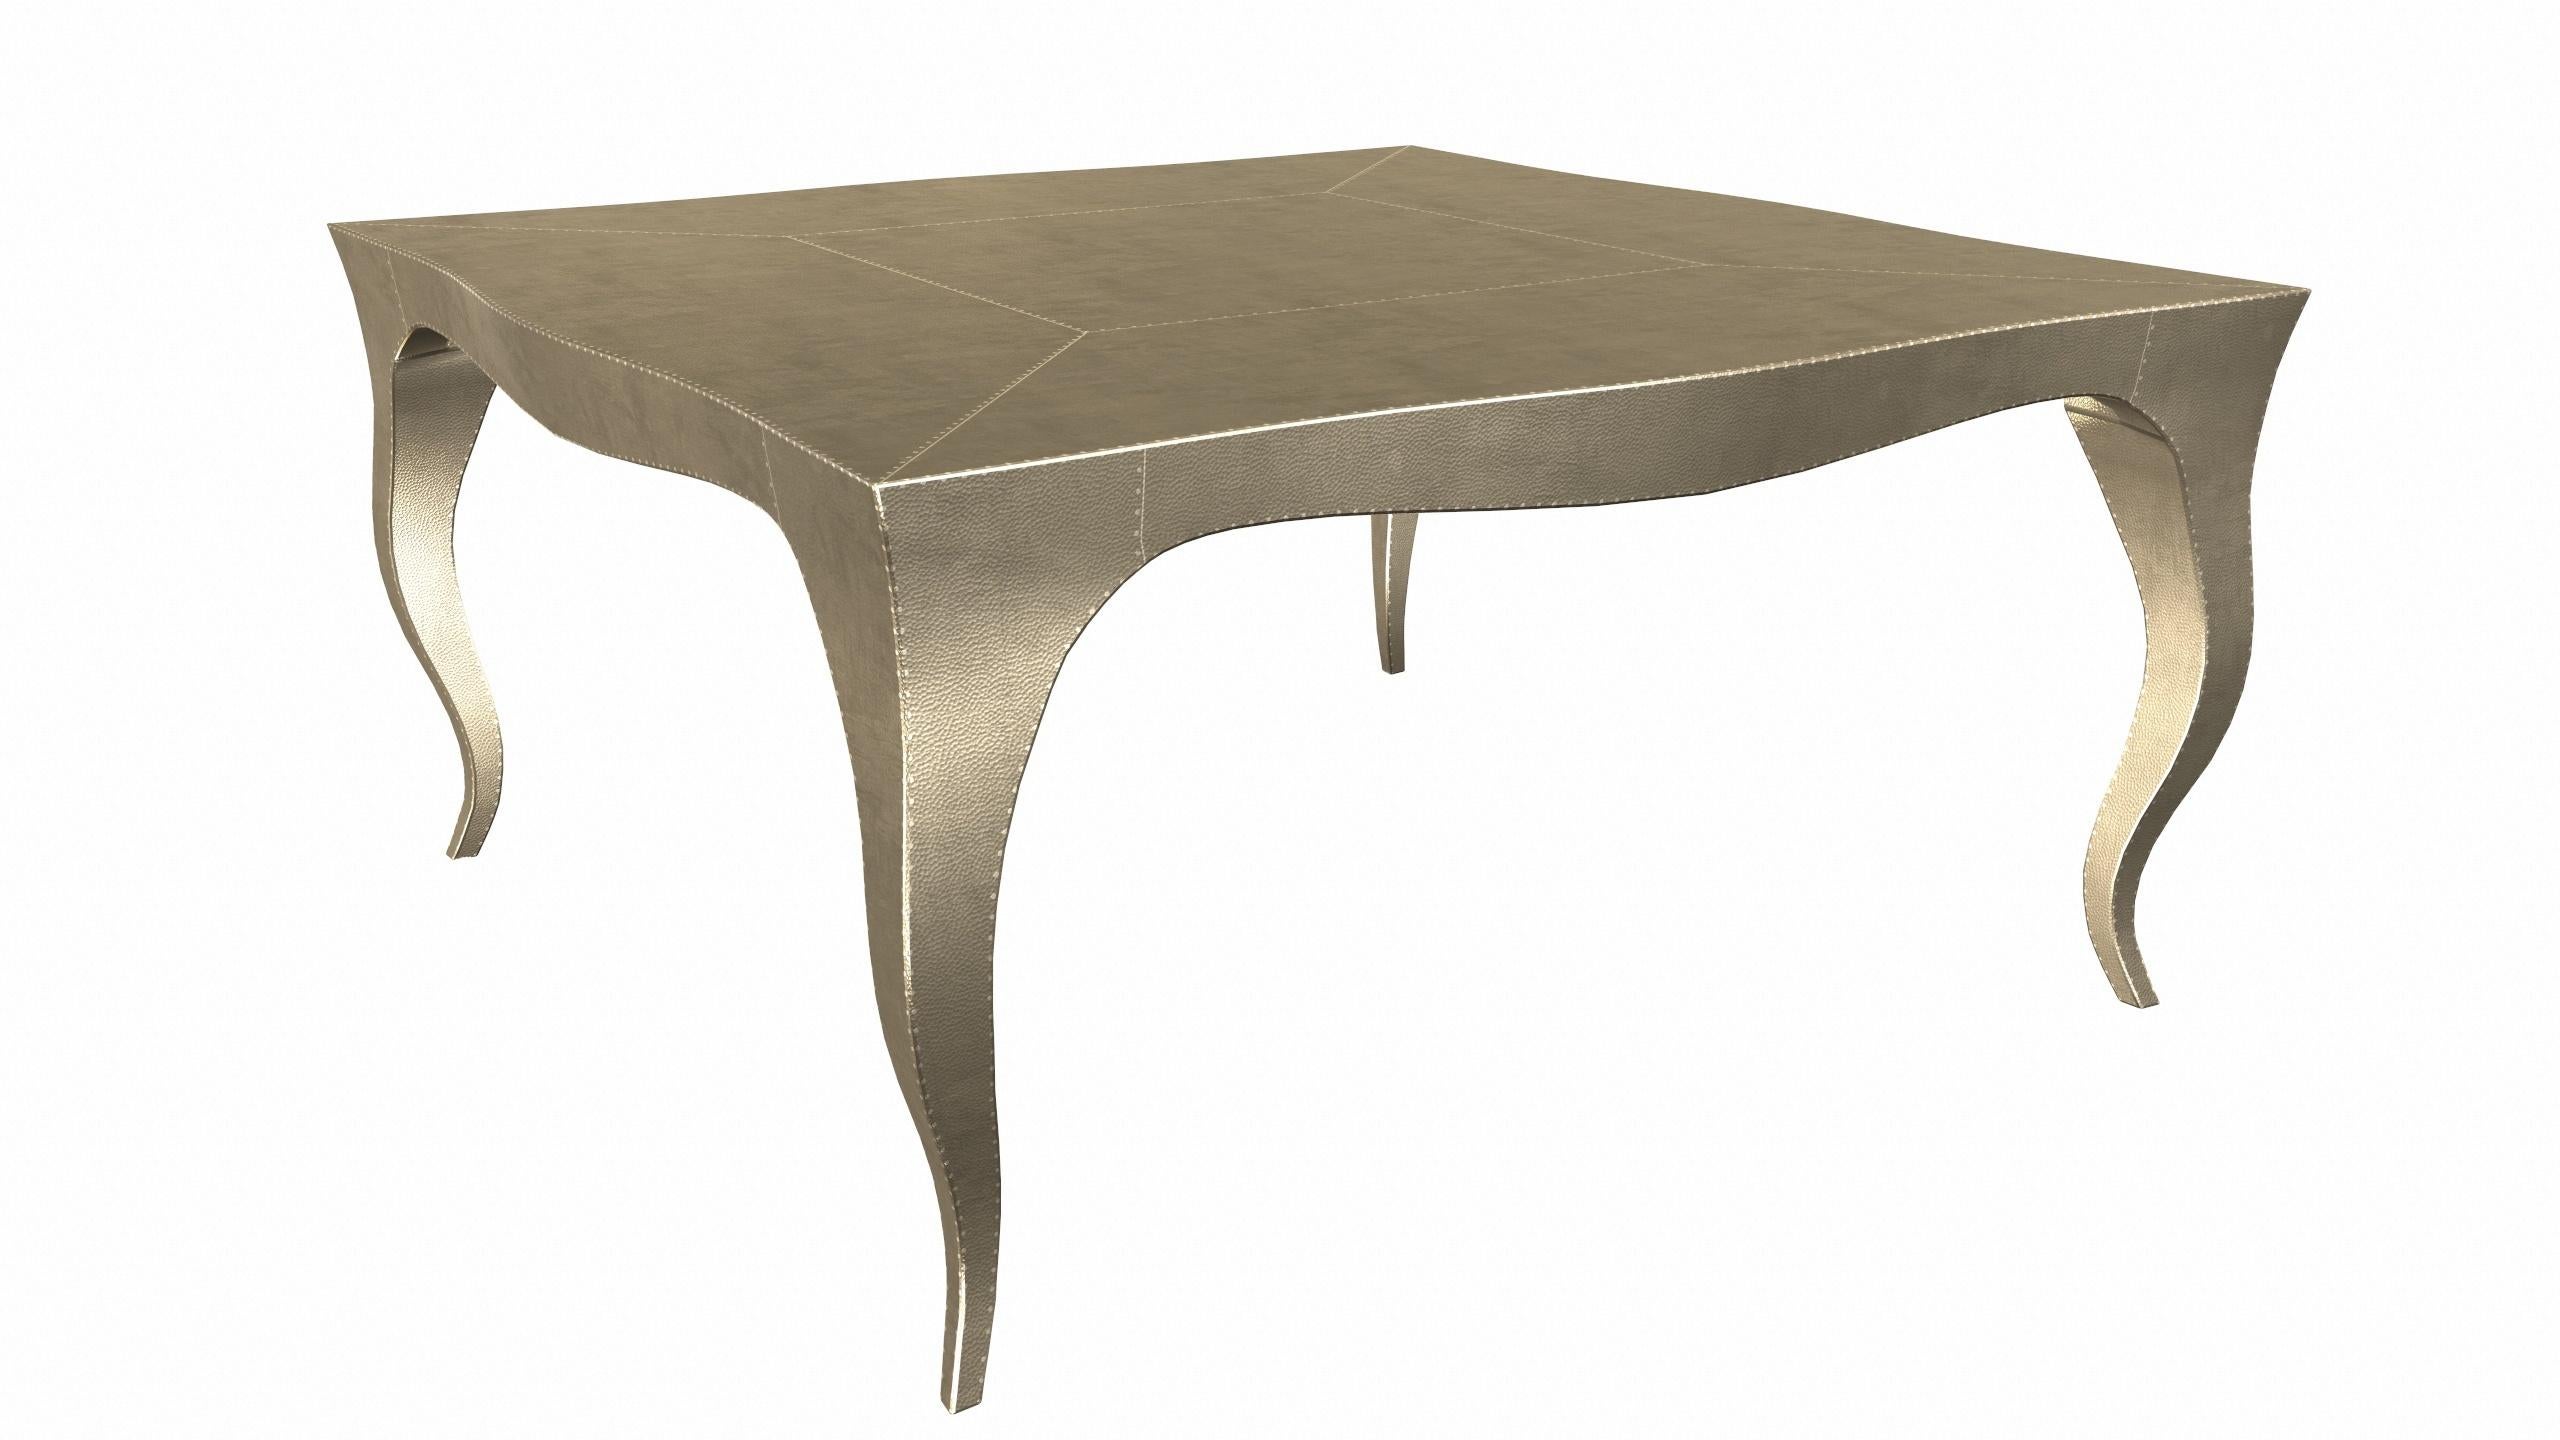 Metal Louise Art Deco Card Tables and Tea Tables Mid. Hammered Brass by Paul Mathieu For Sale